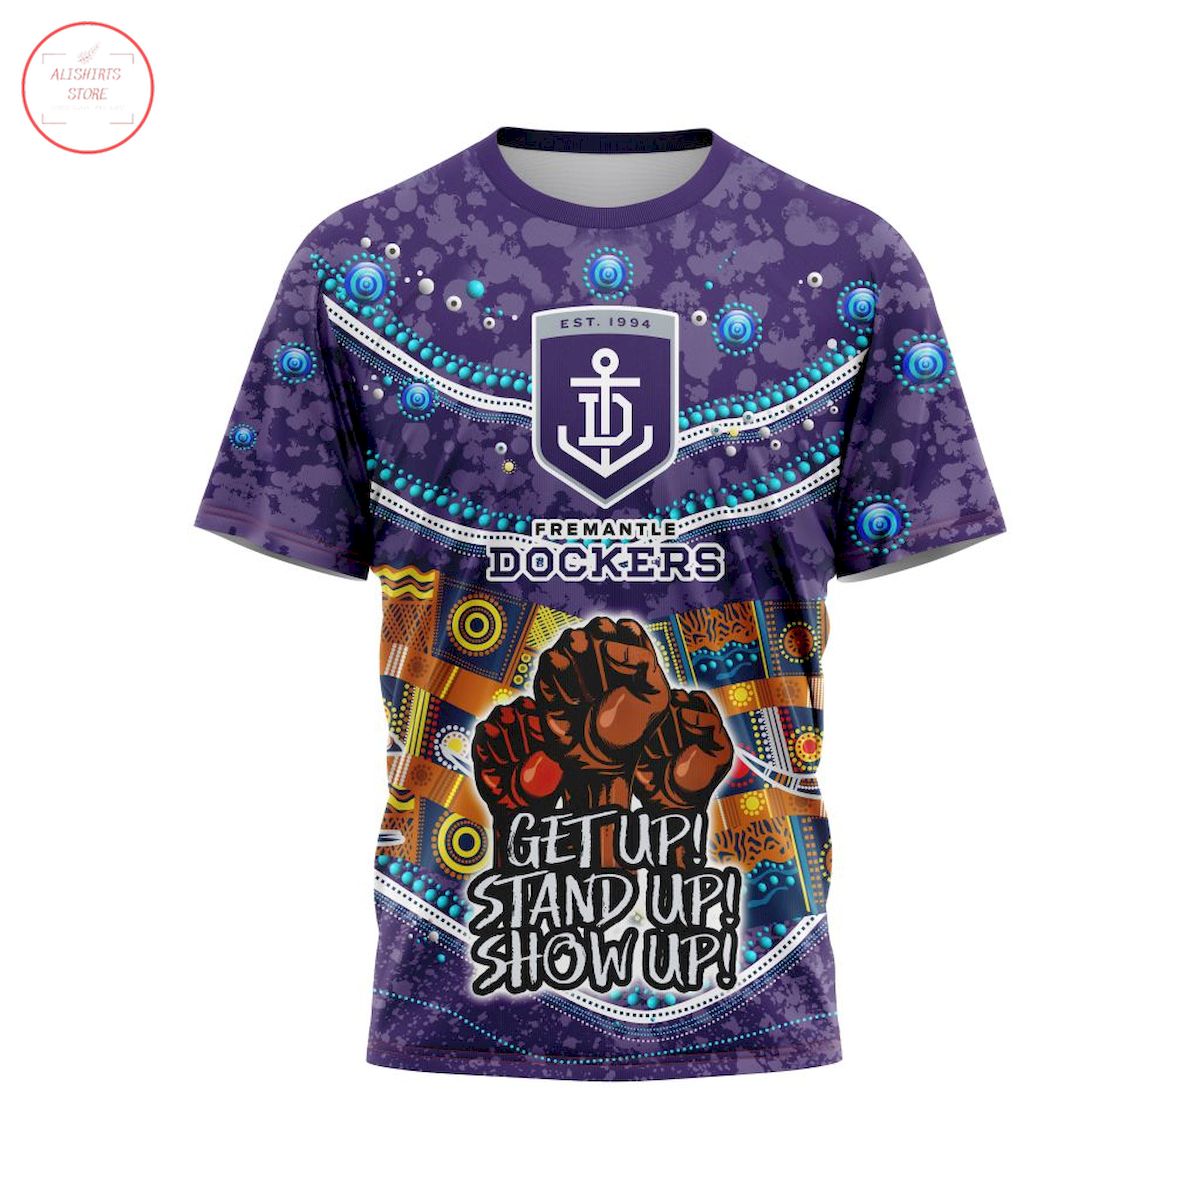 AFL Fremantle Dockers Customized All Over Printed Shirts